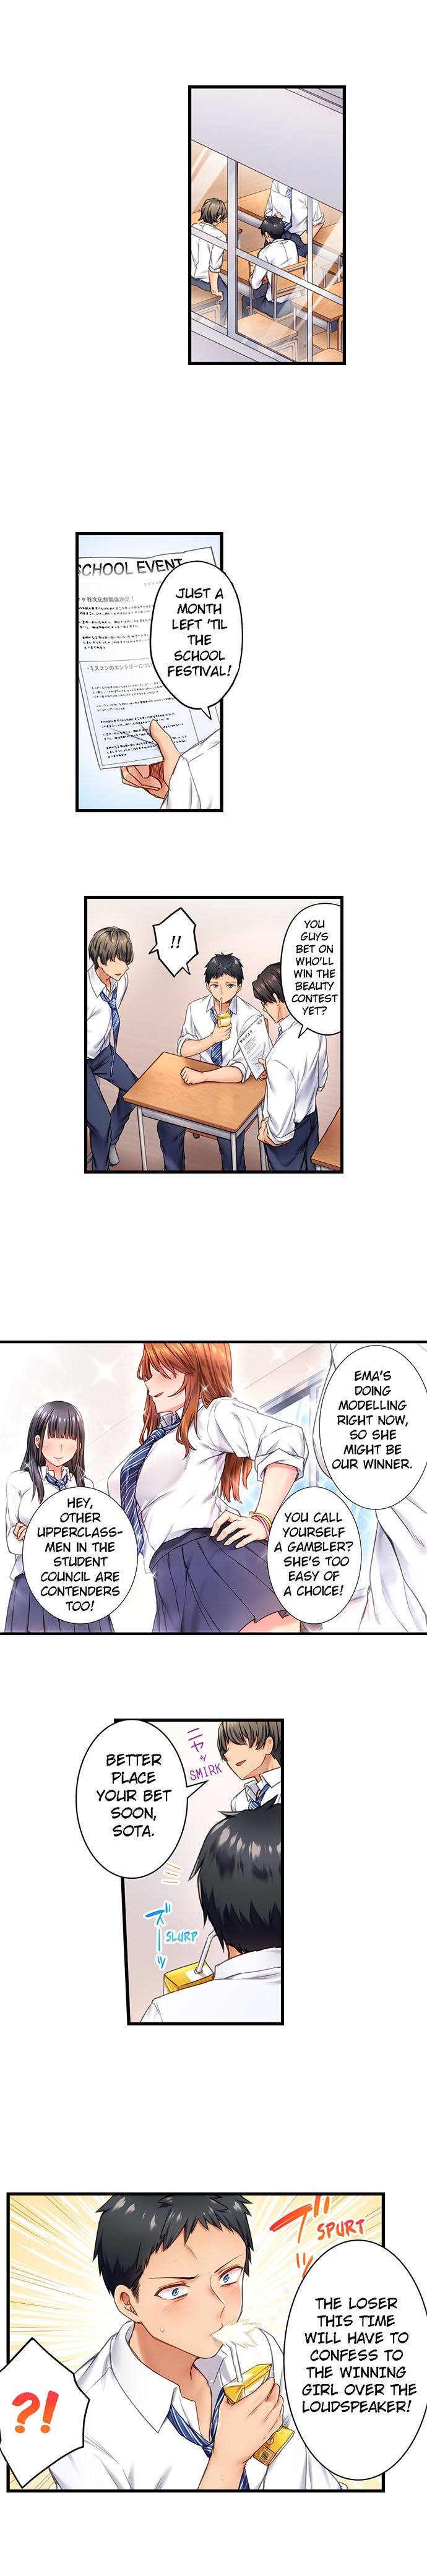 Can’t Believe My Loner Childhood Friend Became This Sexy Girl - Chapter 1 Page 2